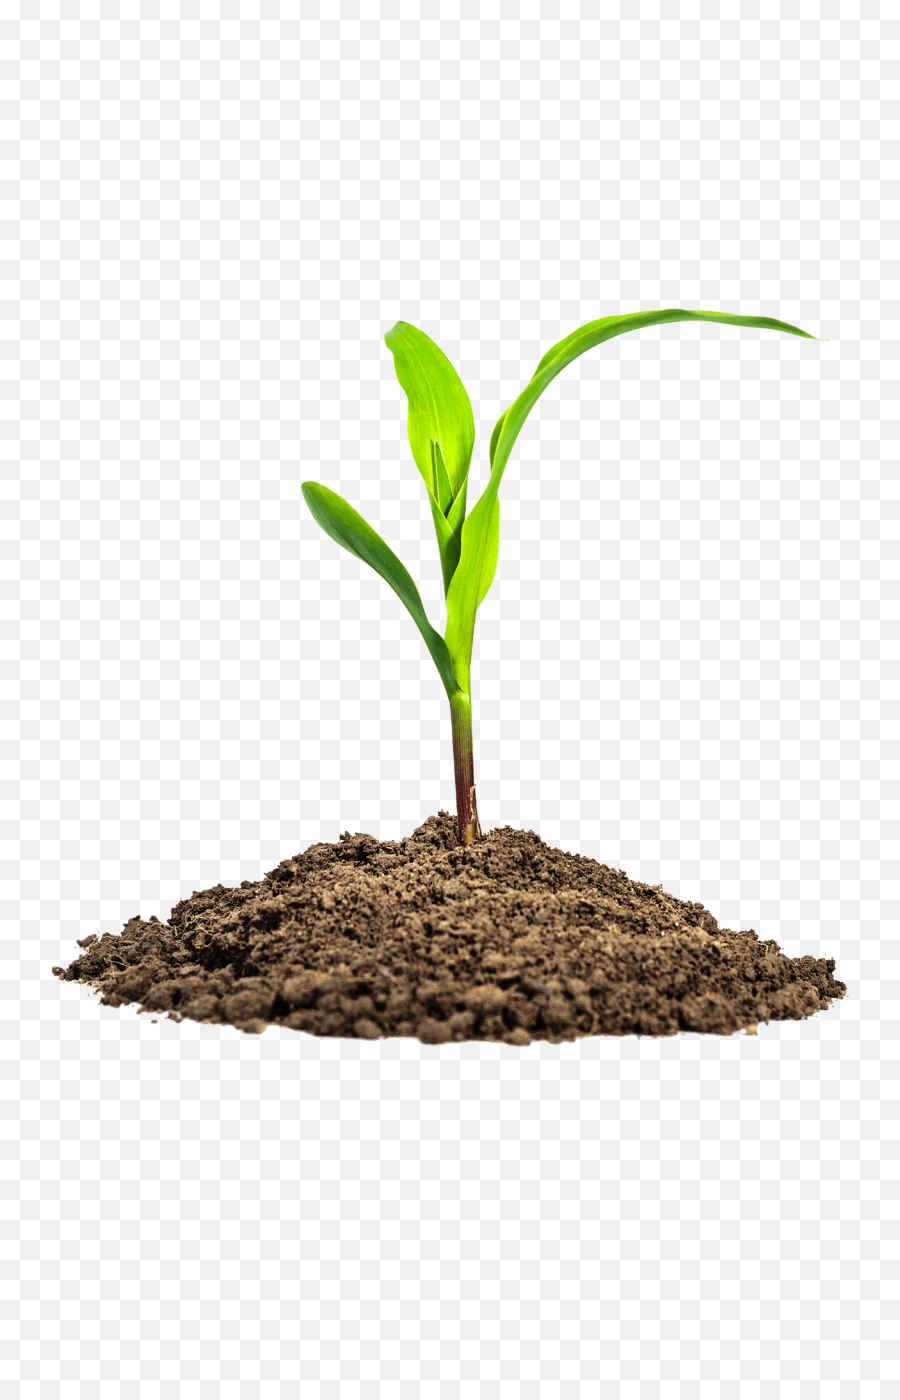 Leaves In Dirt Png Image - Purepng Free Transparent Cc0 Maize Seedling Png,Dirt Transparent Background